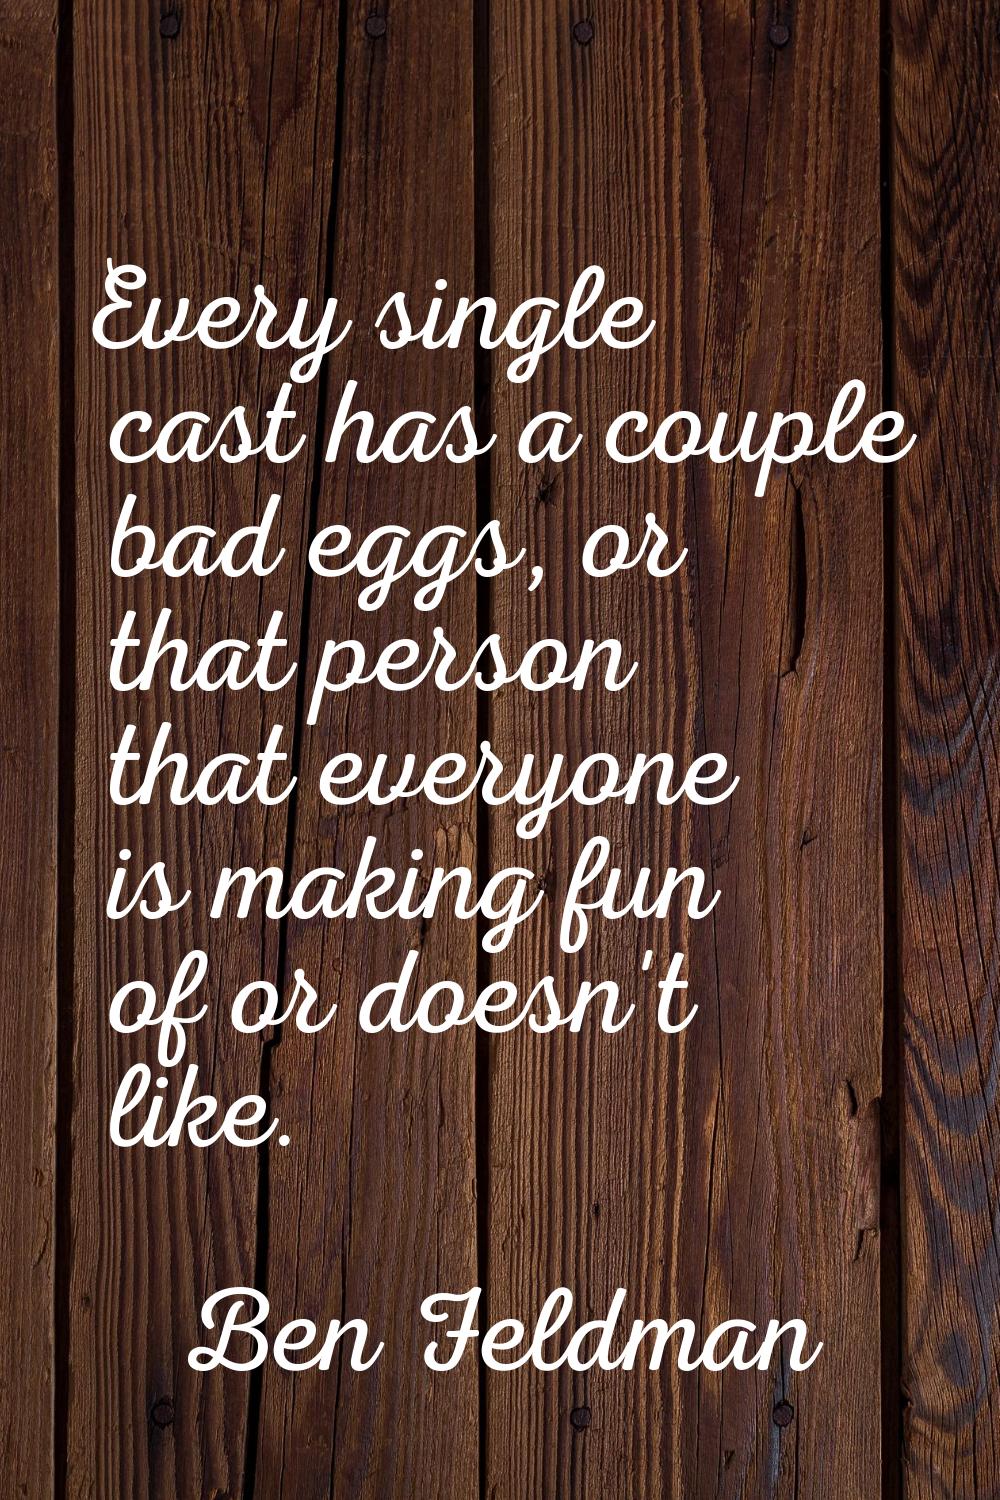 Every single cast has a couple bad eggs, or that person that everyone is making fun of or doesn't l